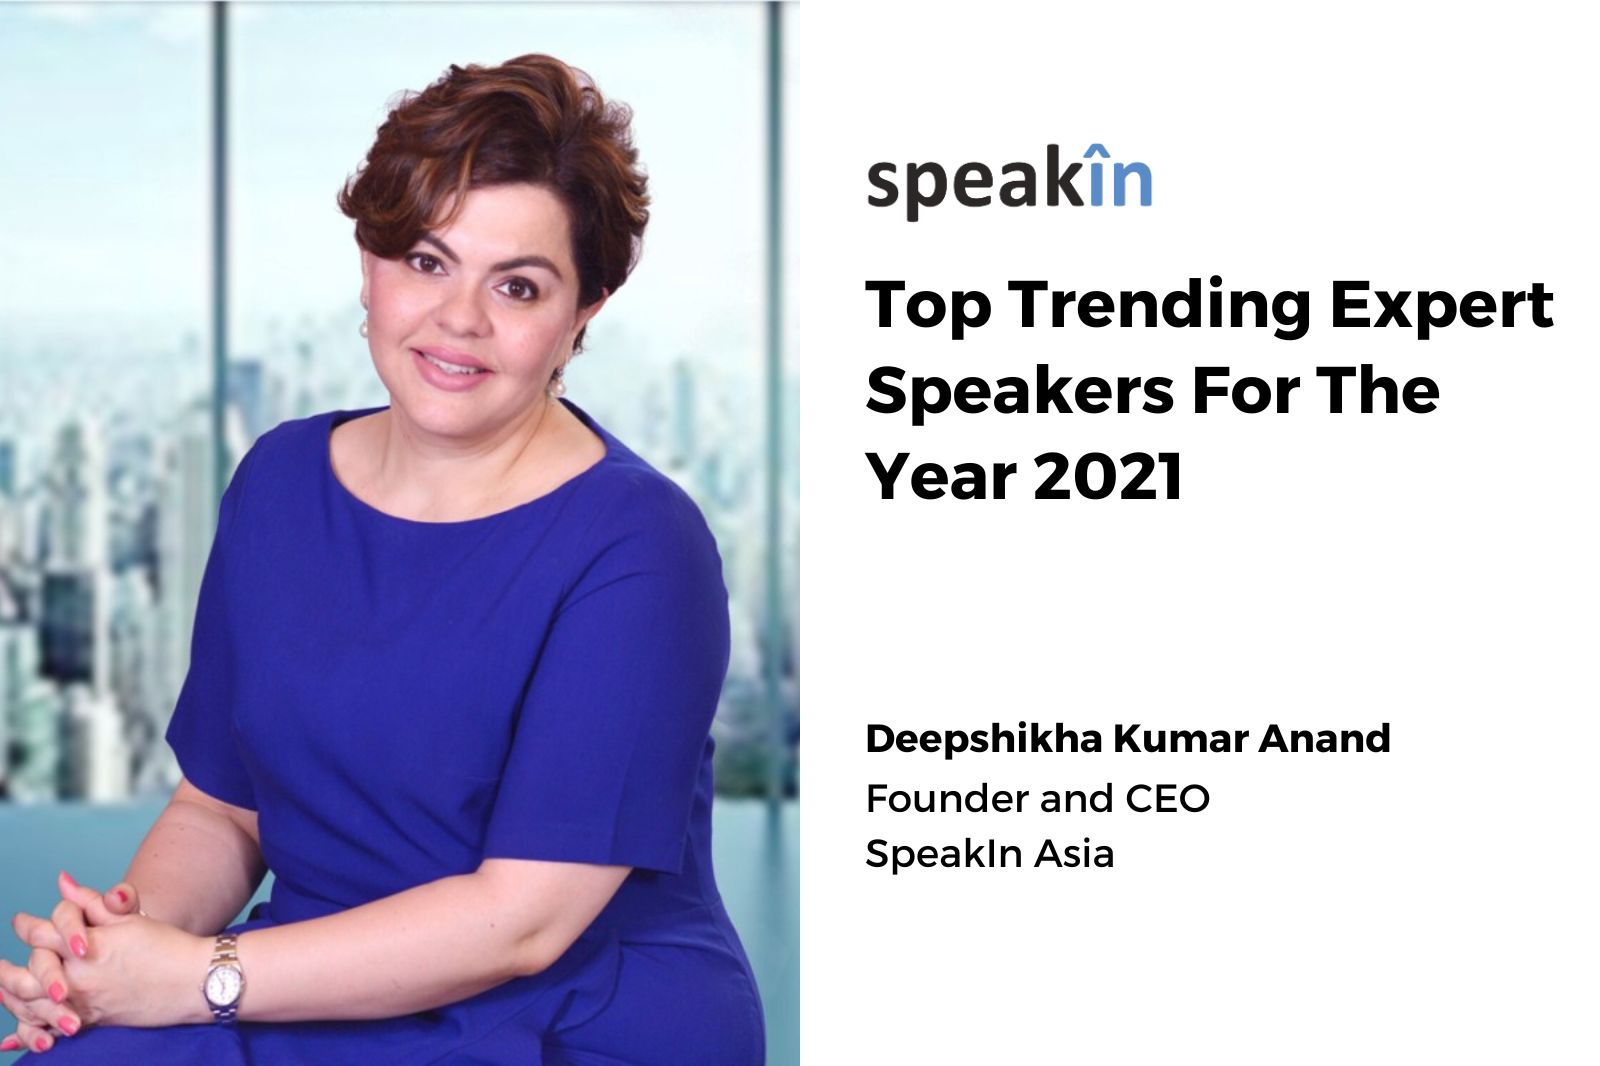 Top Trending Expert Speakers For The Year 2021